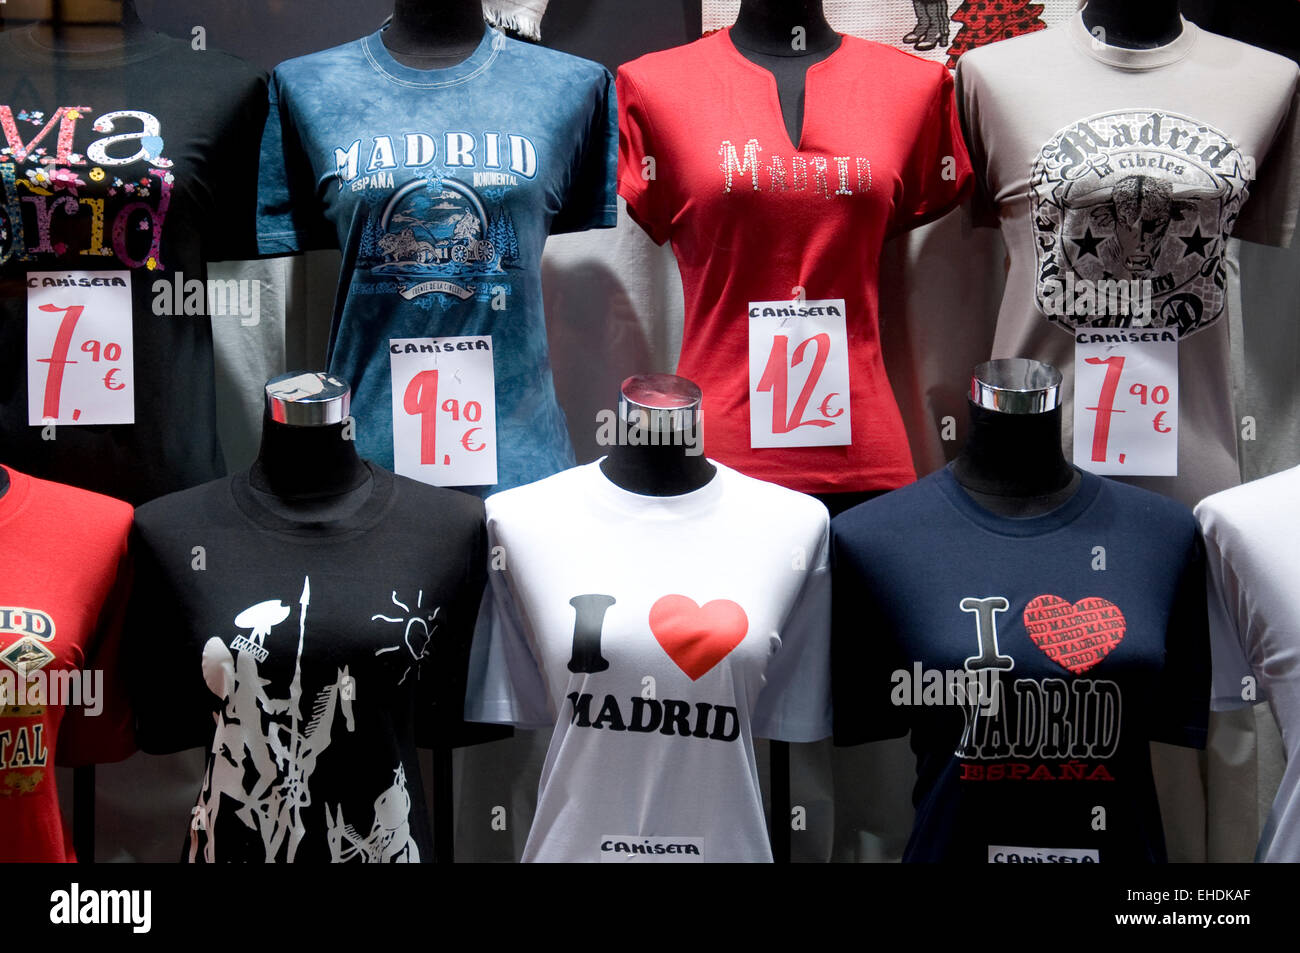 Souvenir t-shirts on sale in Madrid Spain Stock Photo